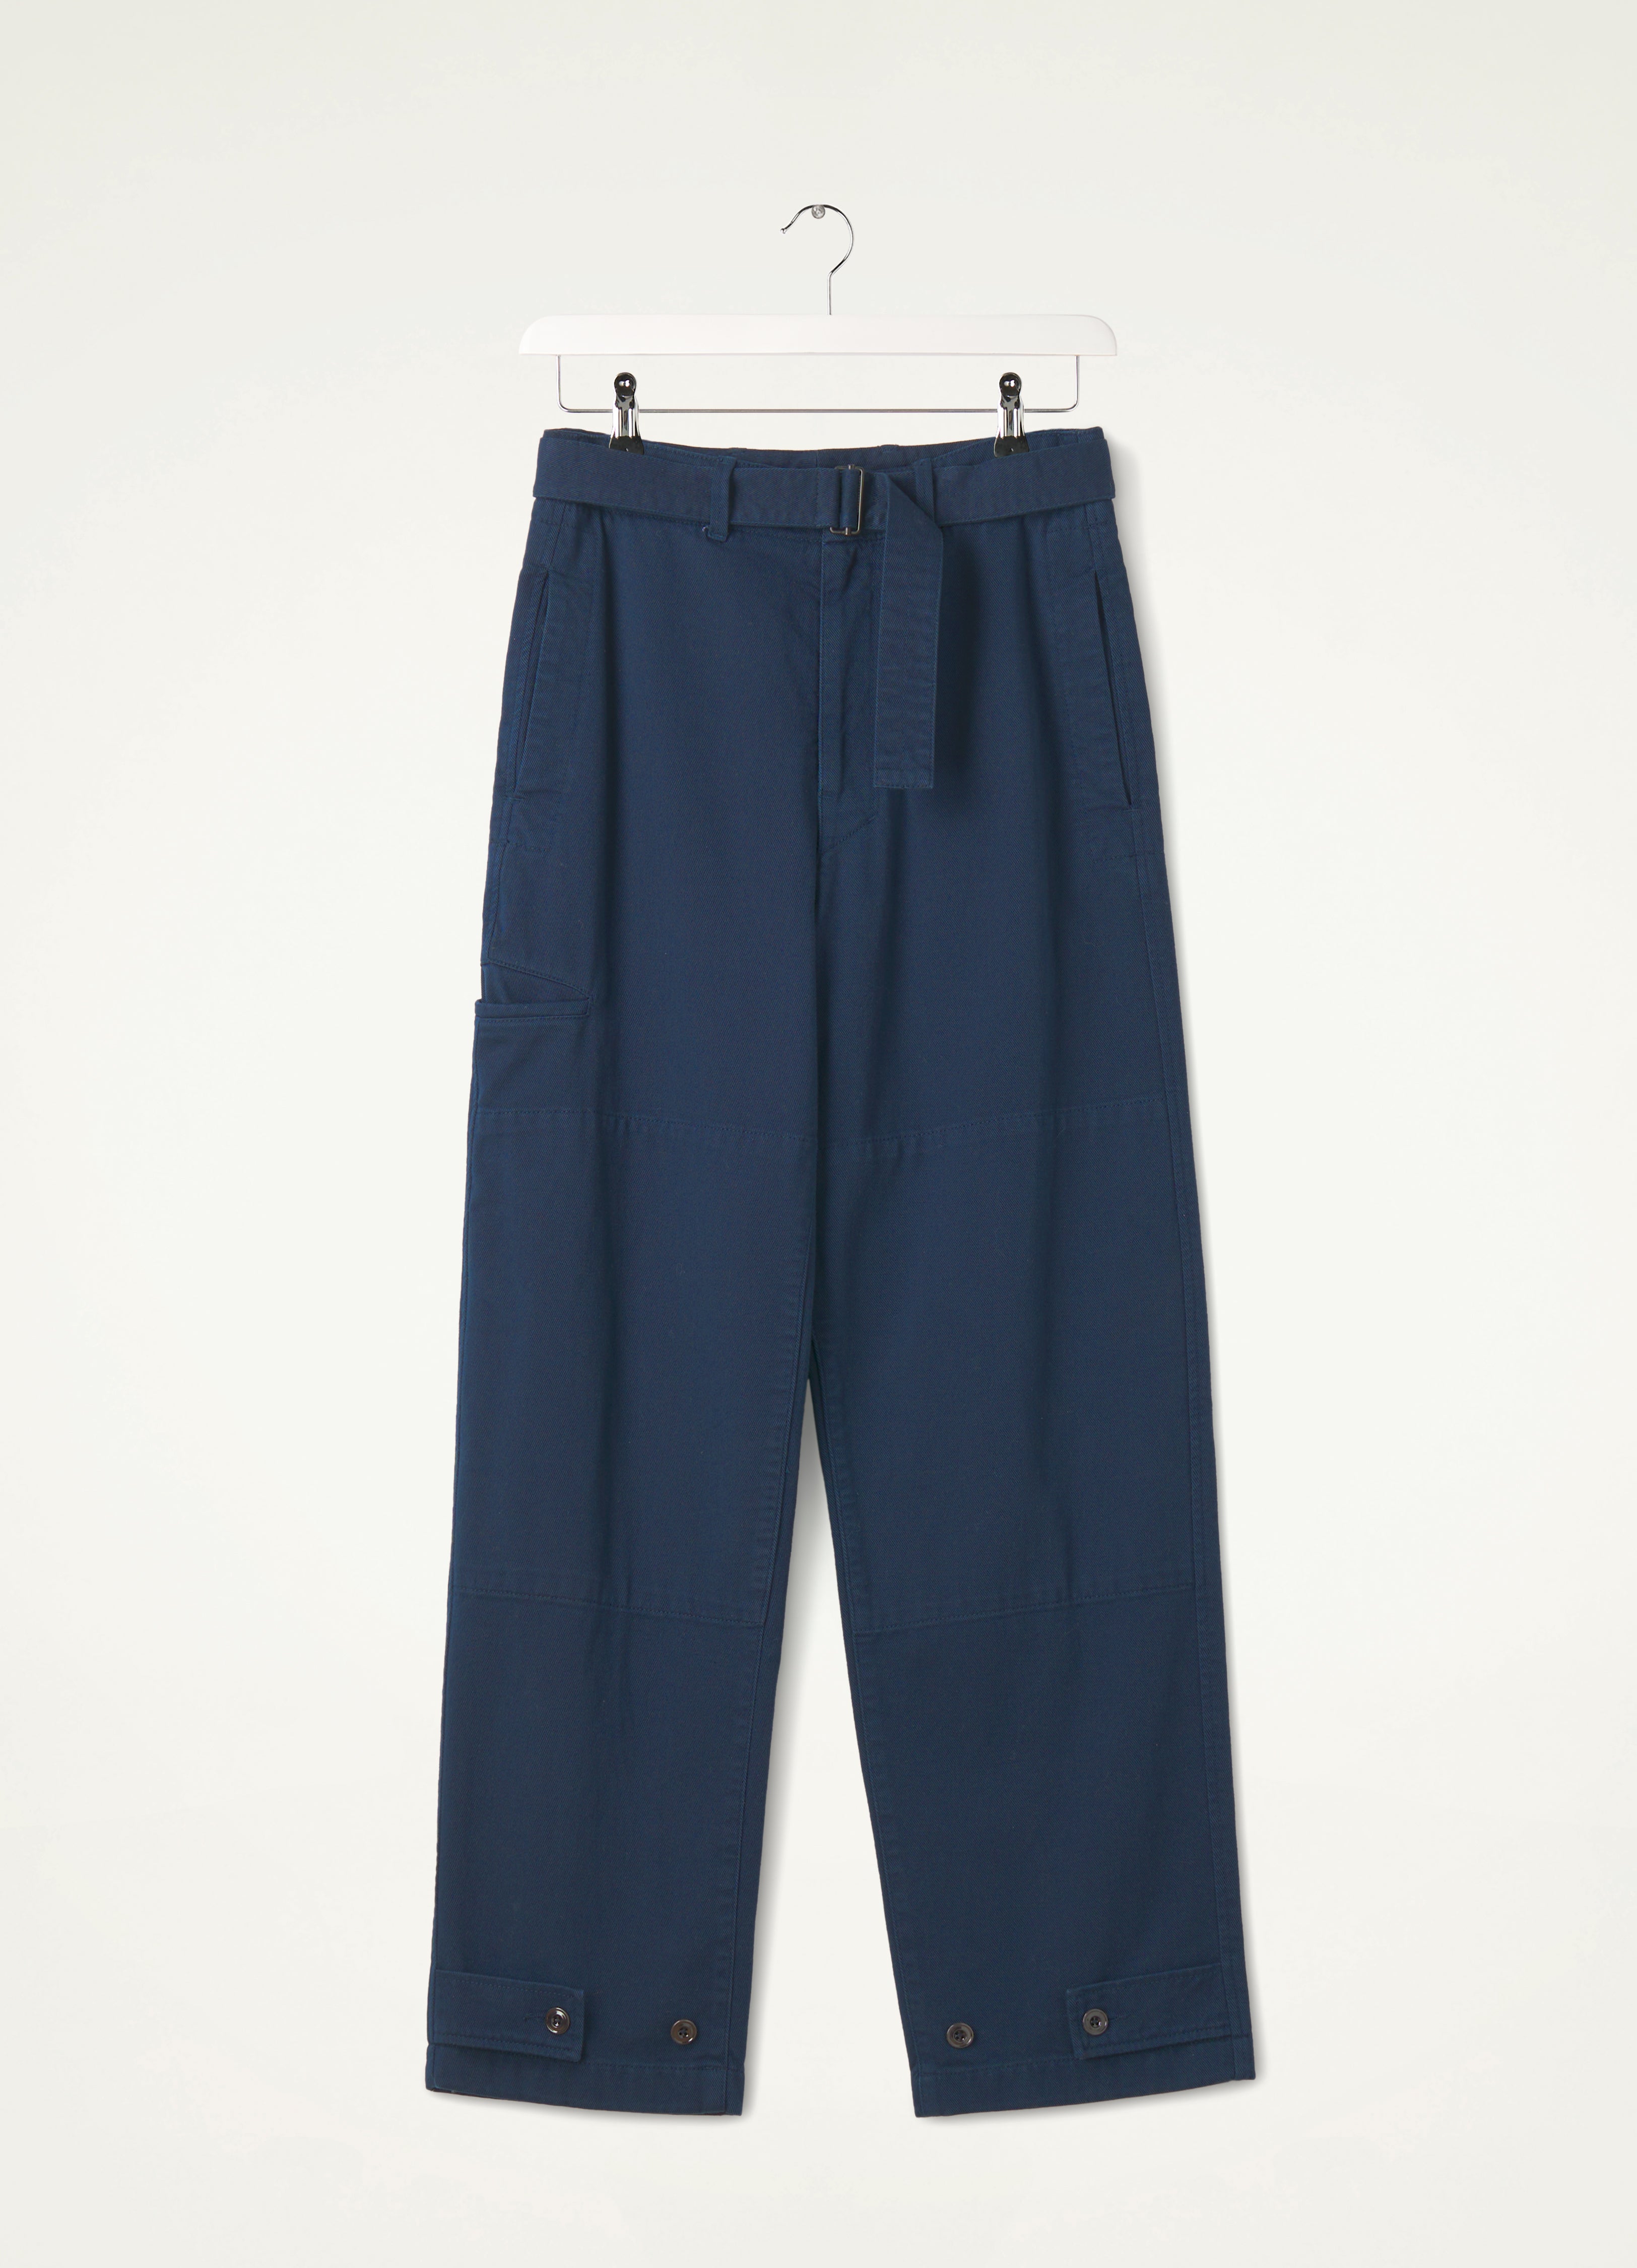 Lemaire Relaxed Pants - Black